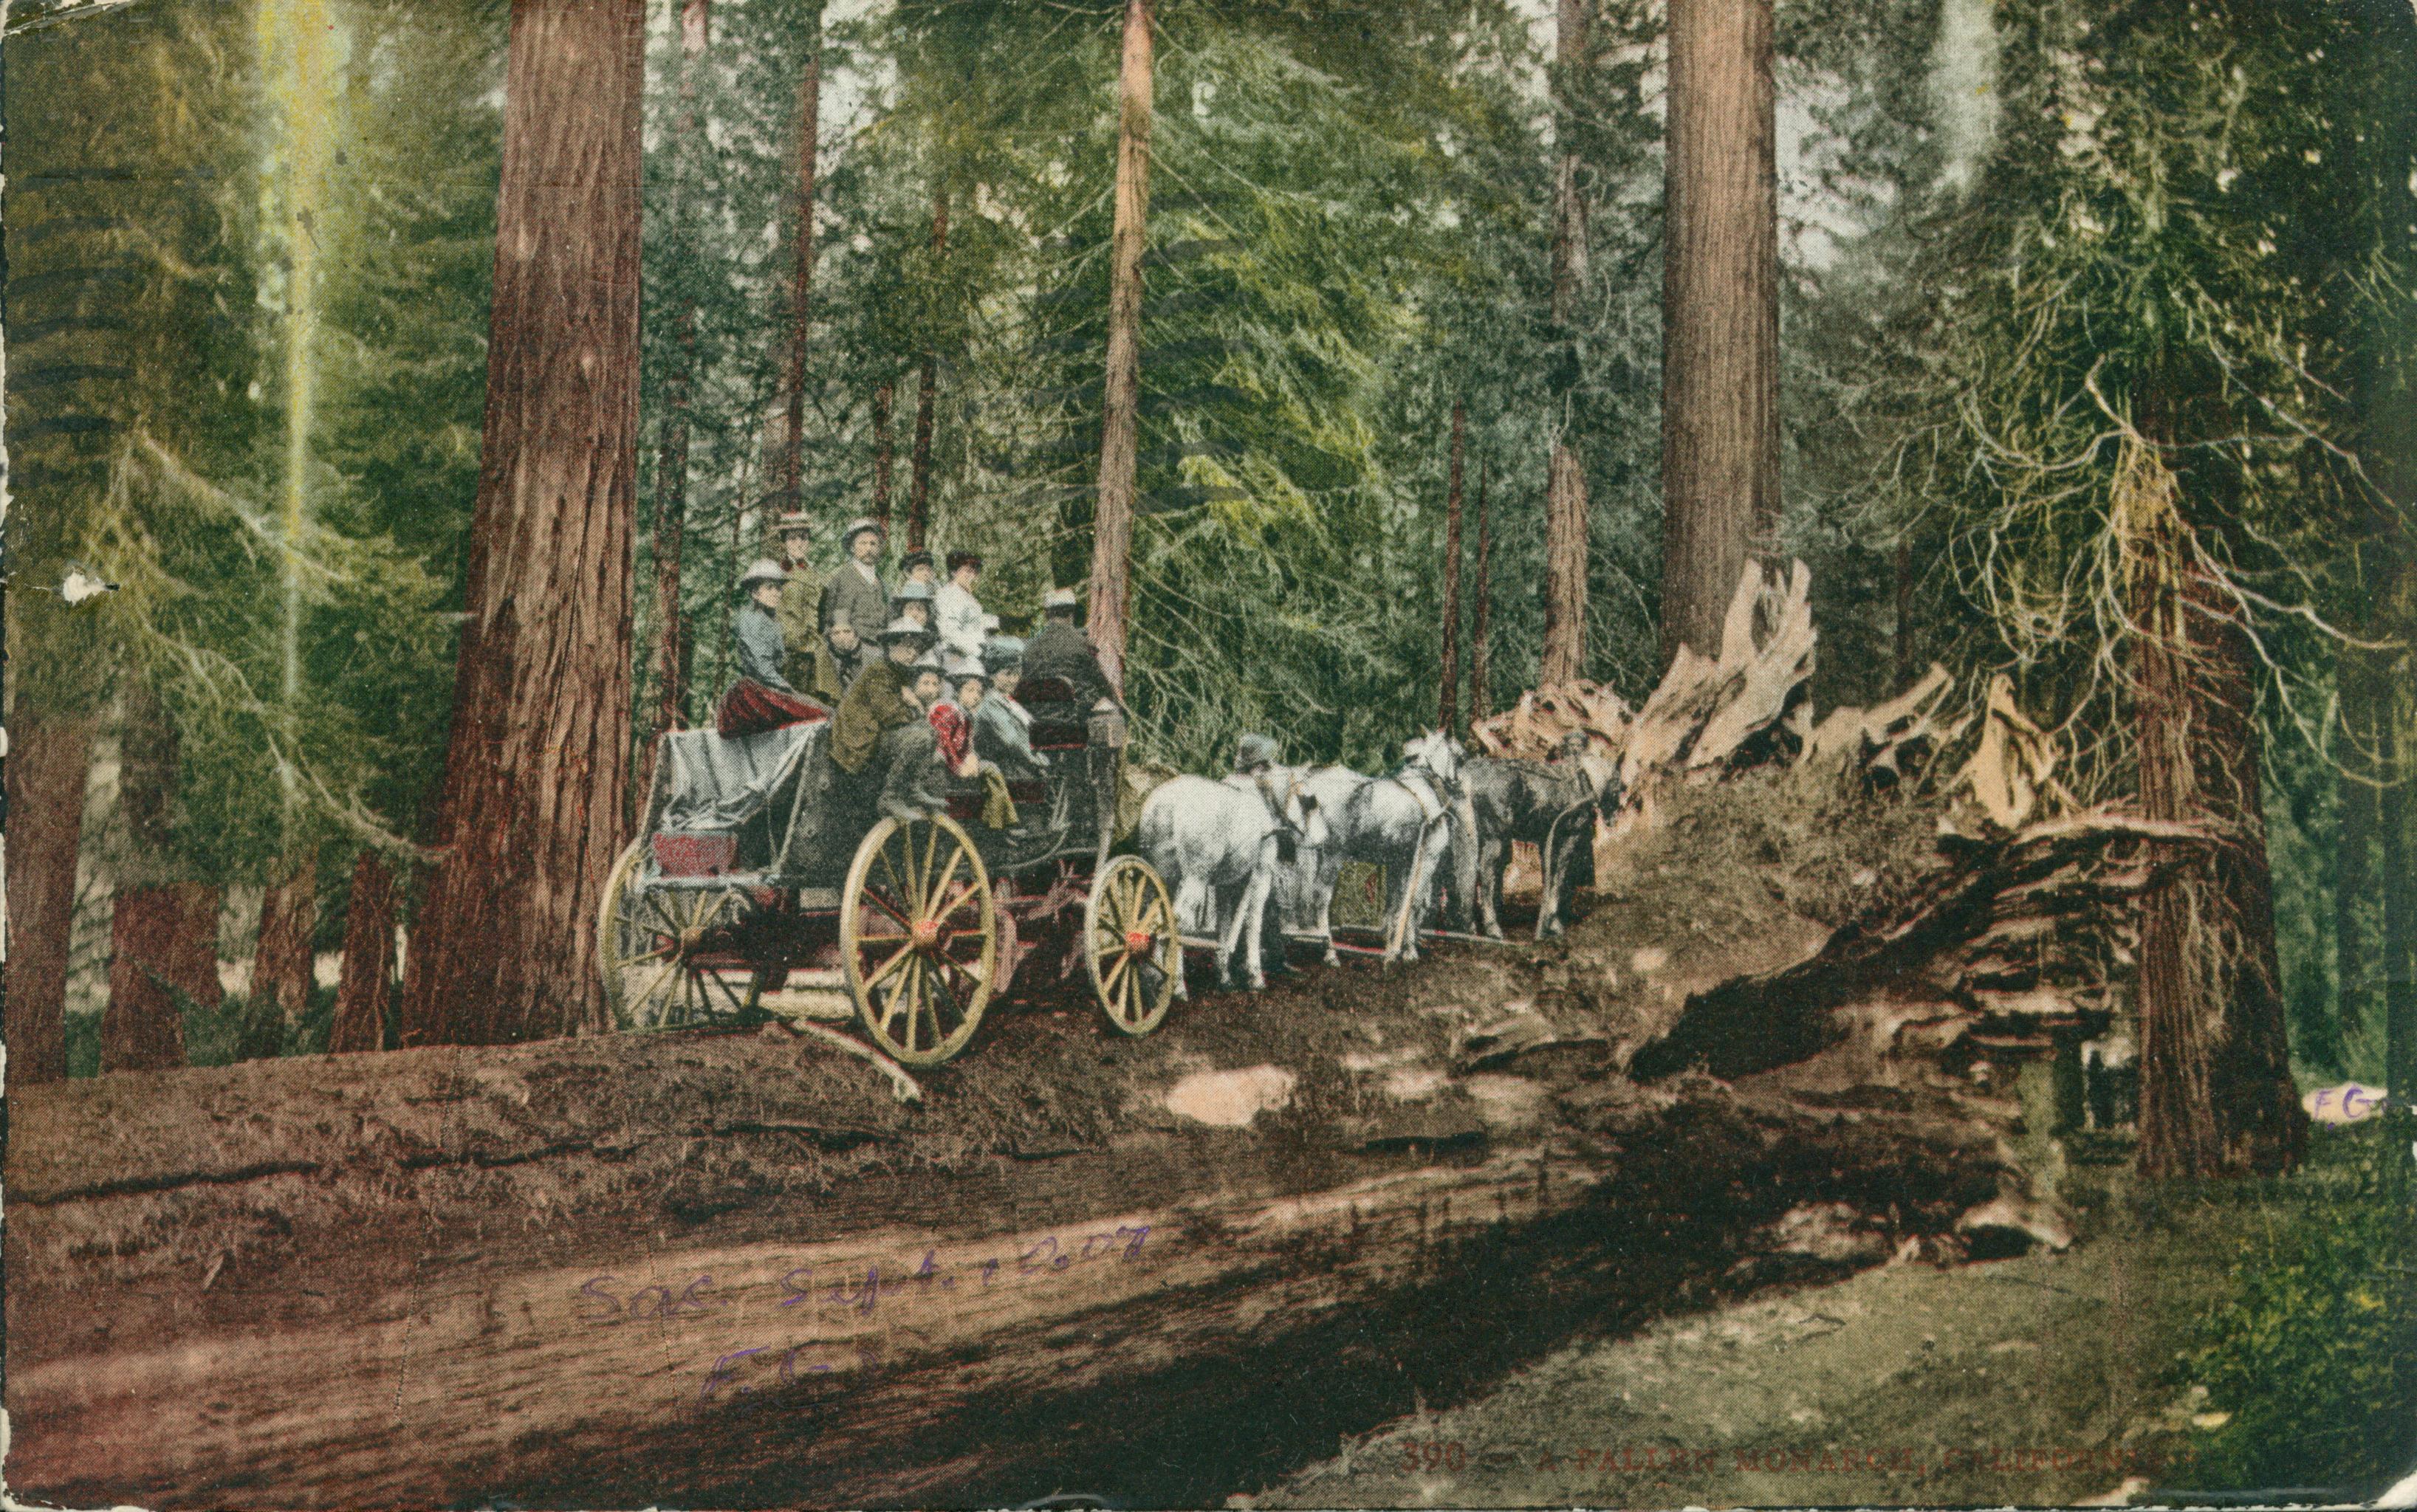 Shows a stagecoach, its horses and passengers on Fallen Monarch